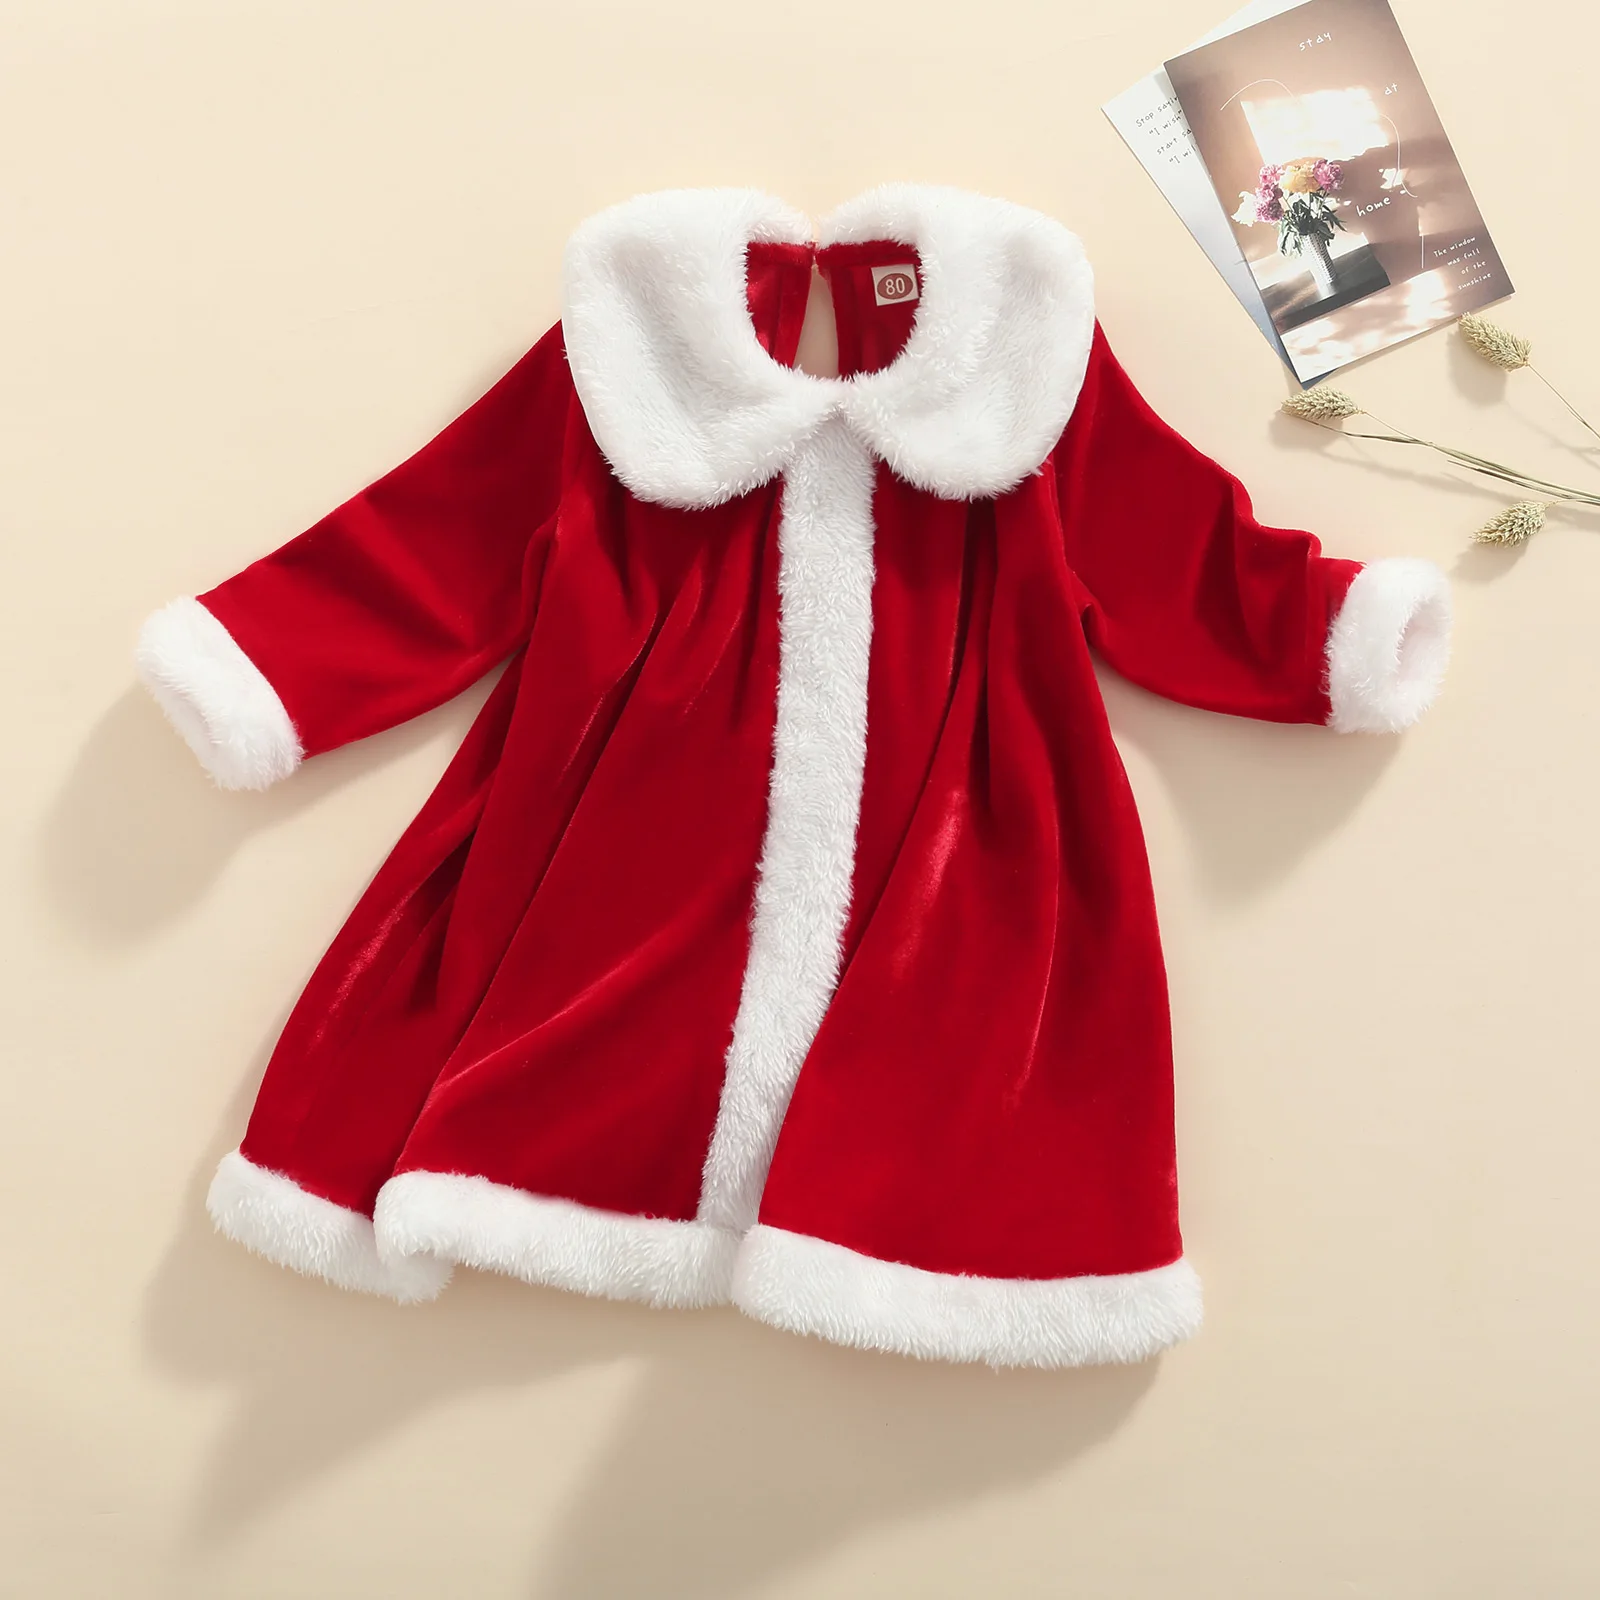 

Kids Christmas Dress Coral Fleece Splicing Color Peter Pan Neck Long Sleeves Skirt for Girls 6 Months to 5 Years Red